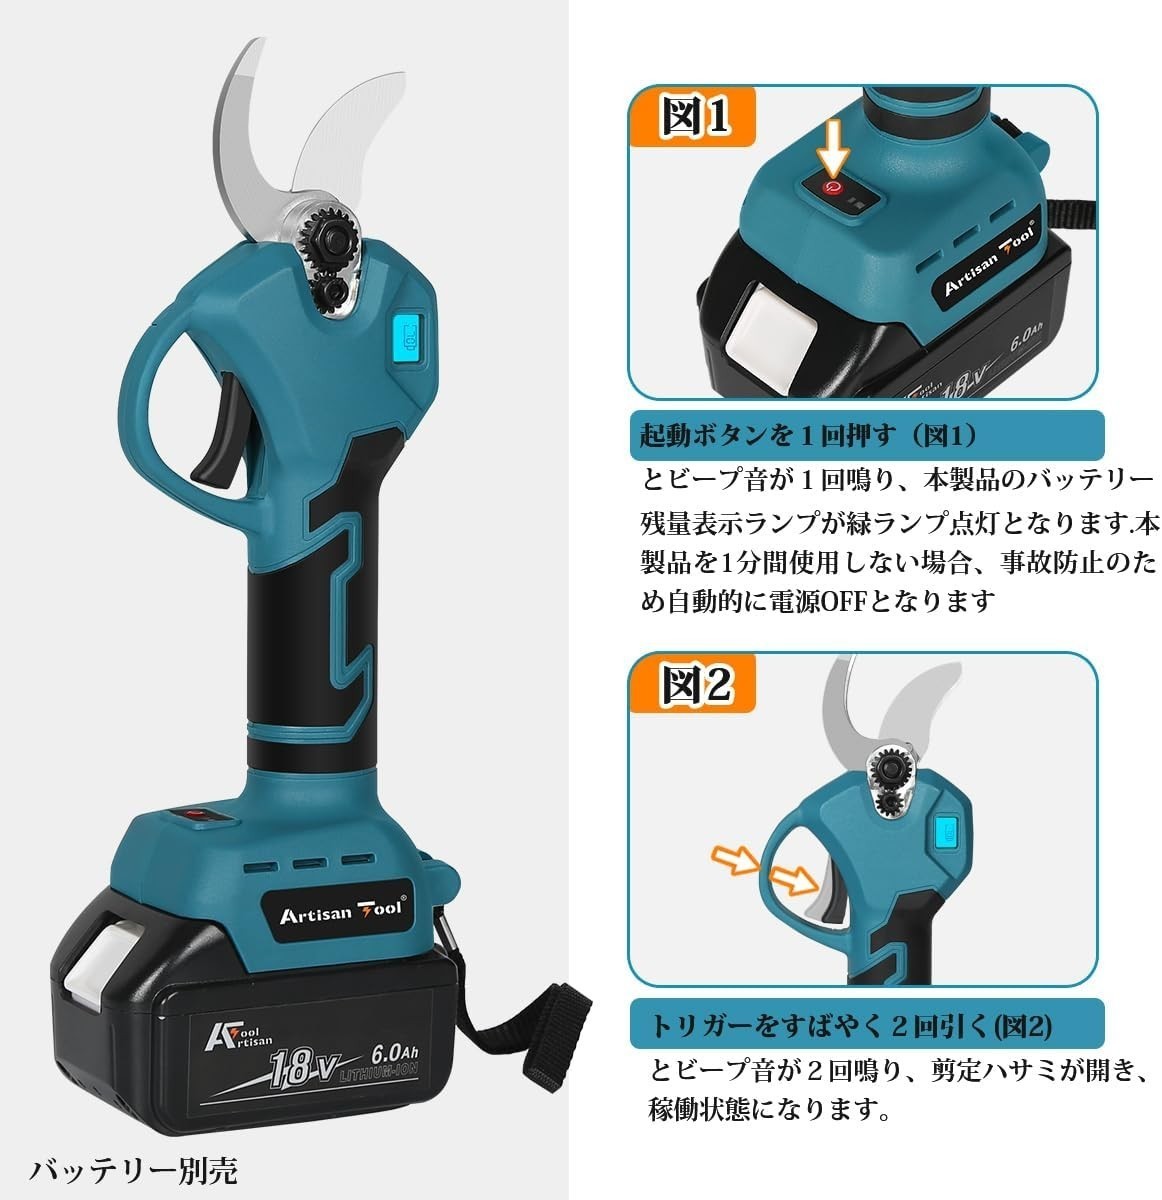  cordless pruning scissors blue liquid crystal panel attaching brushless motor AT-PS03B Makita interchangeable Makita 18V BL1830 BL1860 etc. new system correspondence receipt possible 